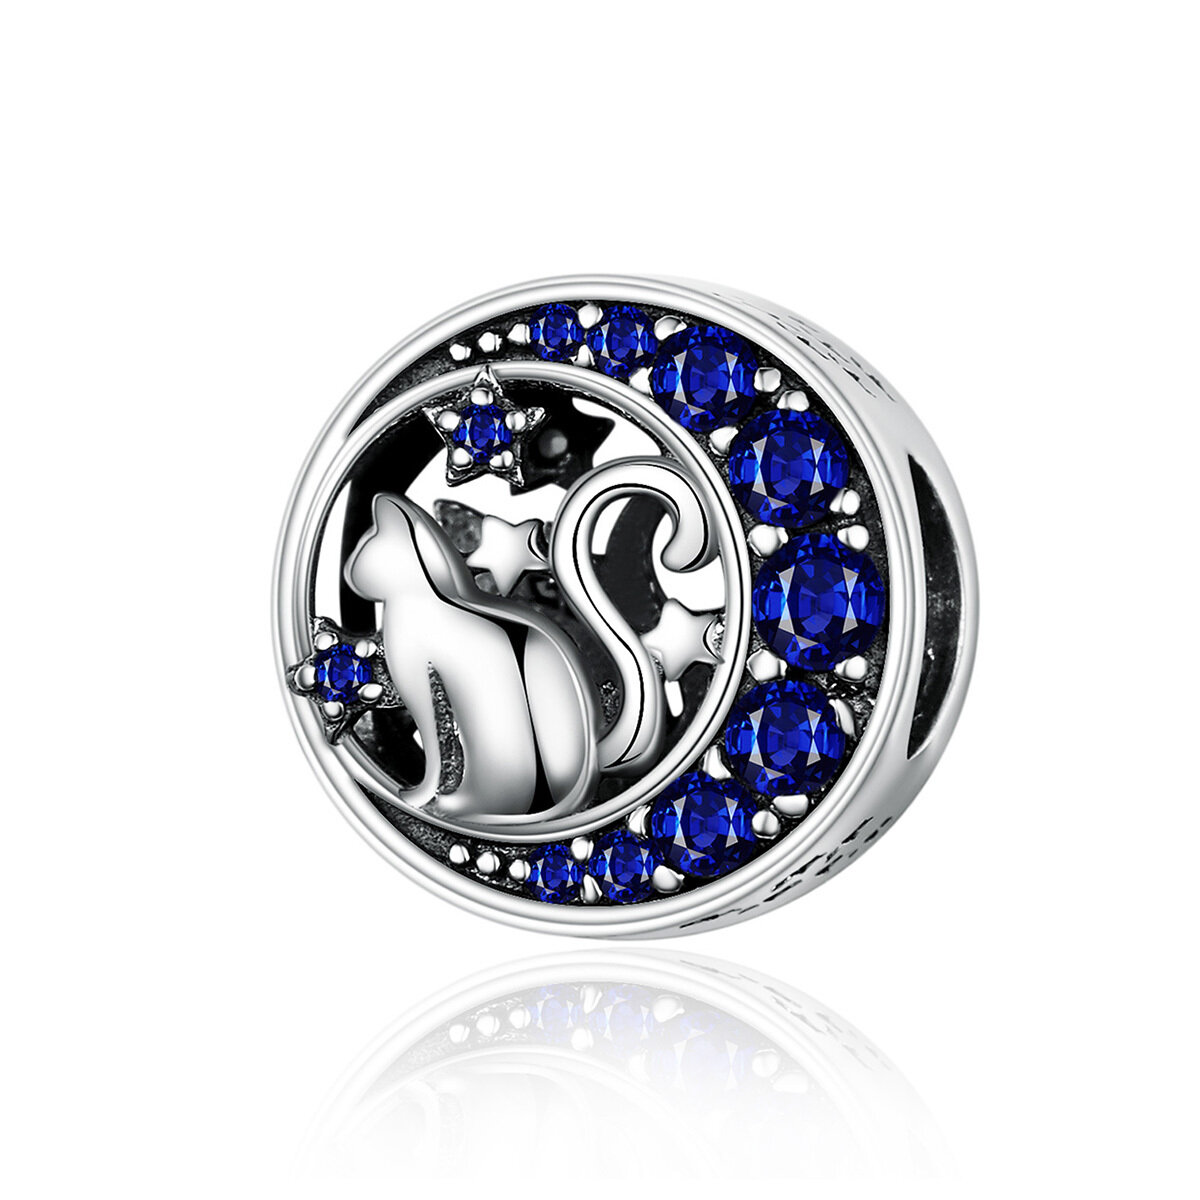 GemKing SCC1204 Moon Cat Kitty in the Moon S925 Sterling Silver Charm